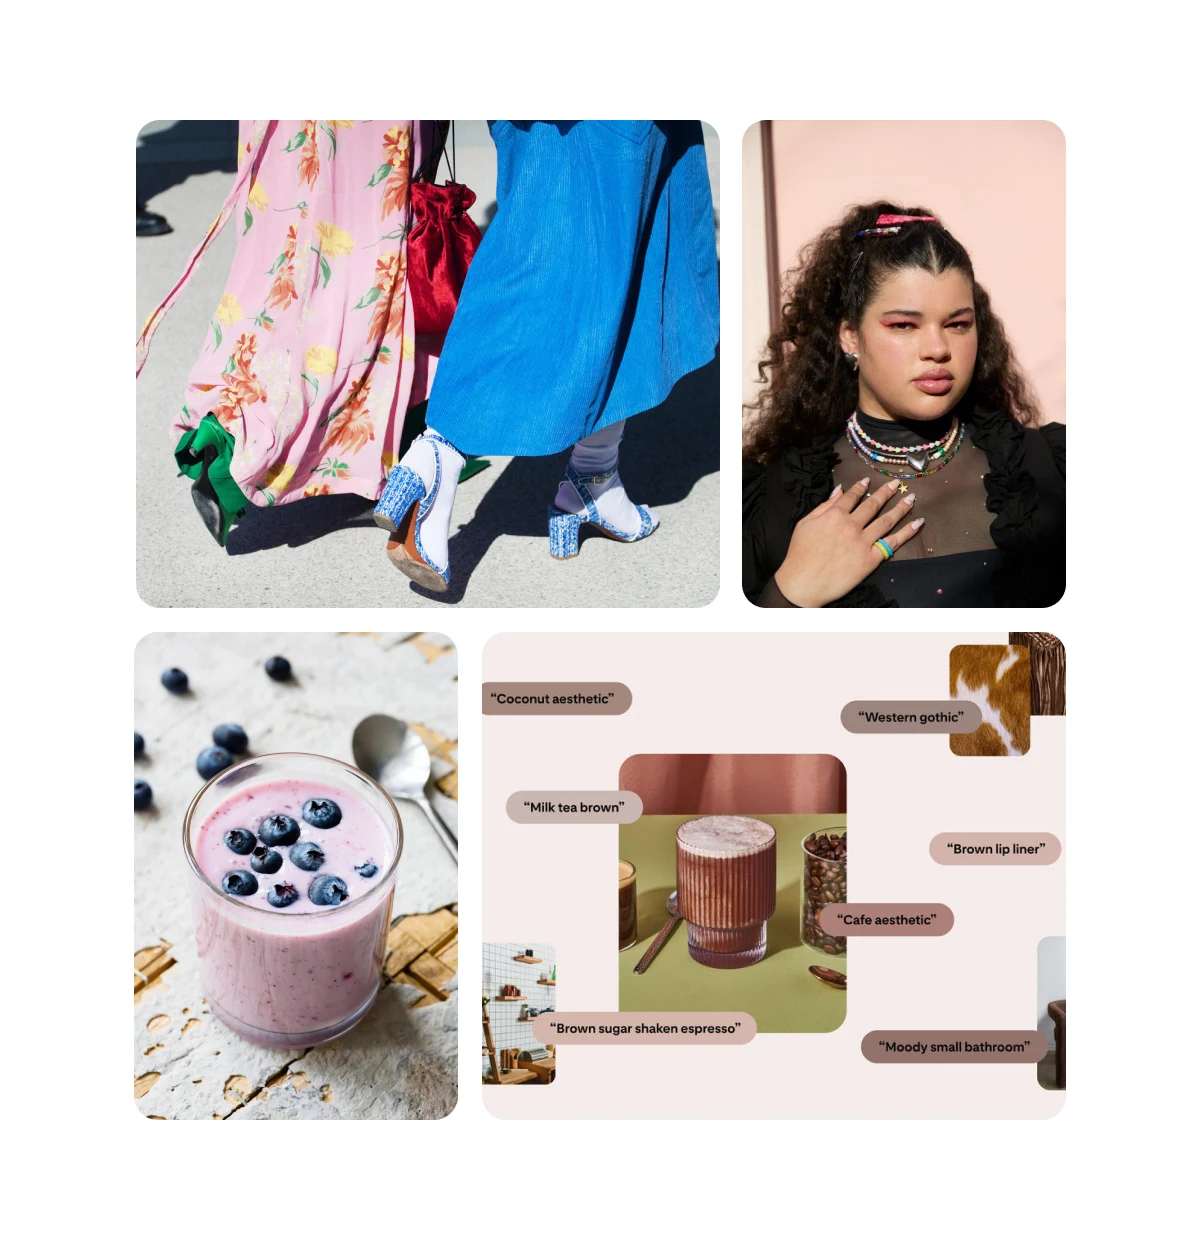 Four Pin grid. Stylish shoes closeup. Fashionable girl posing. Blueberry drink. Brown aesthetic.